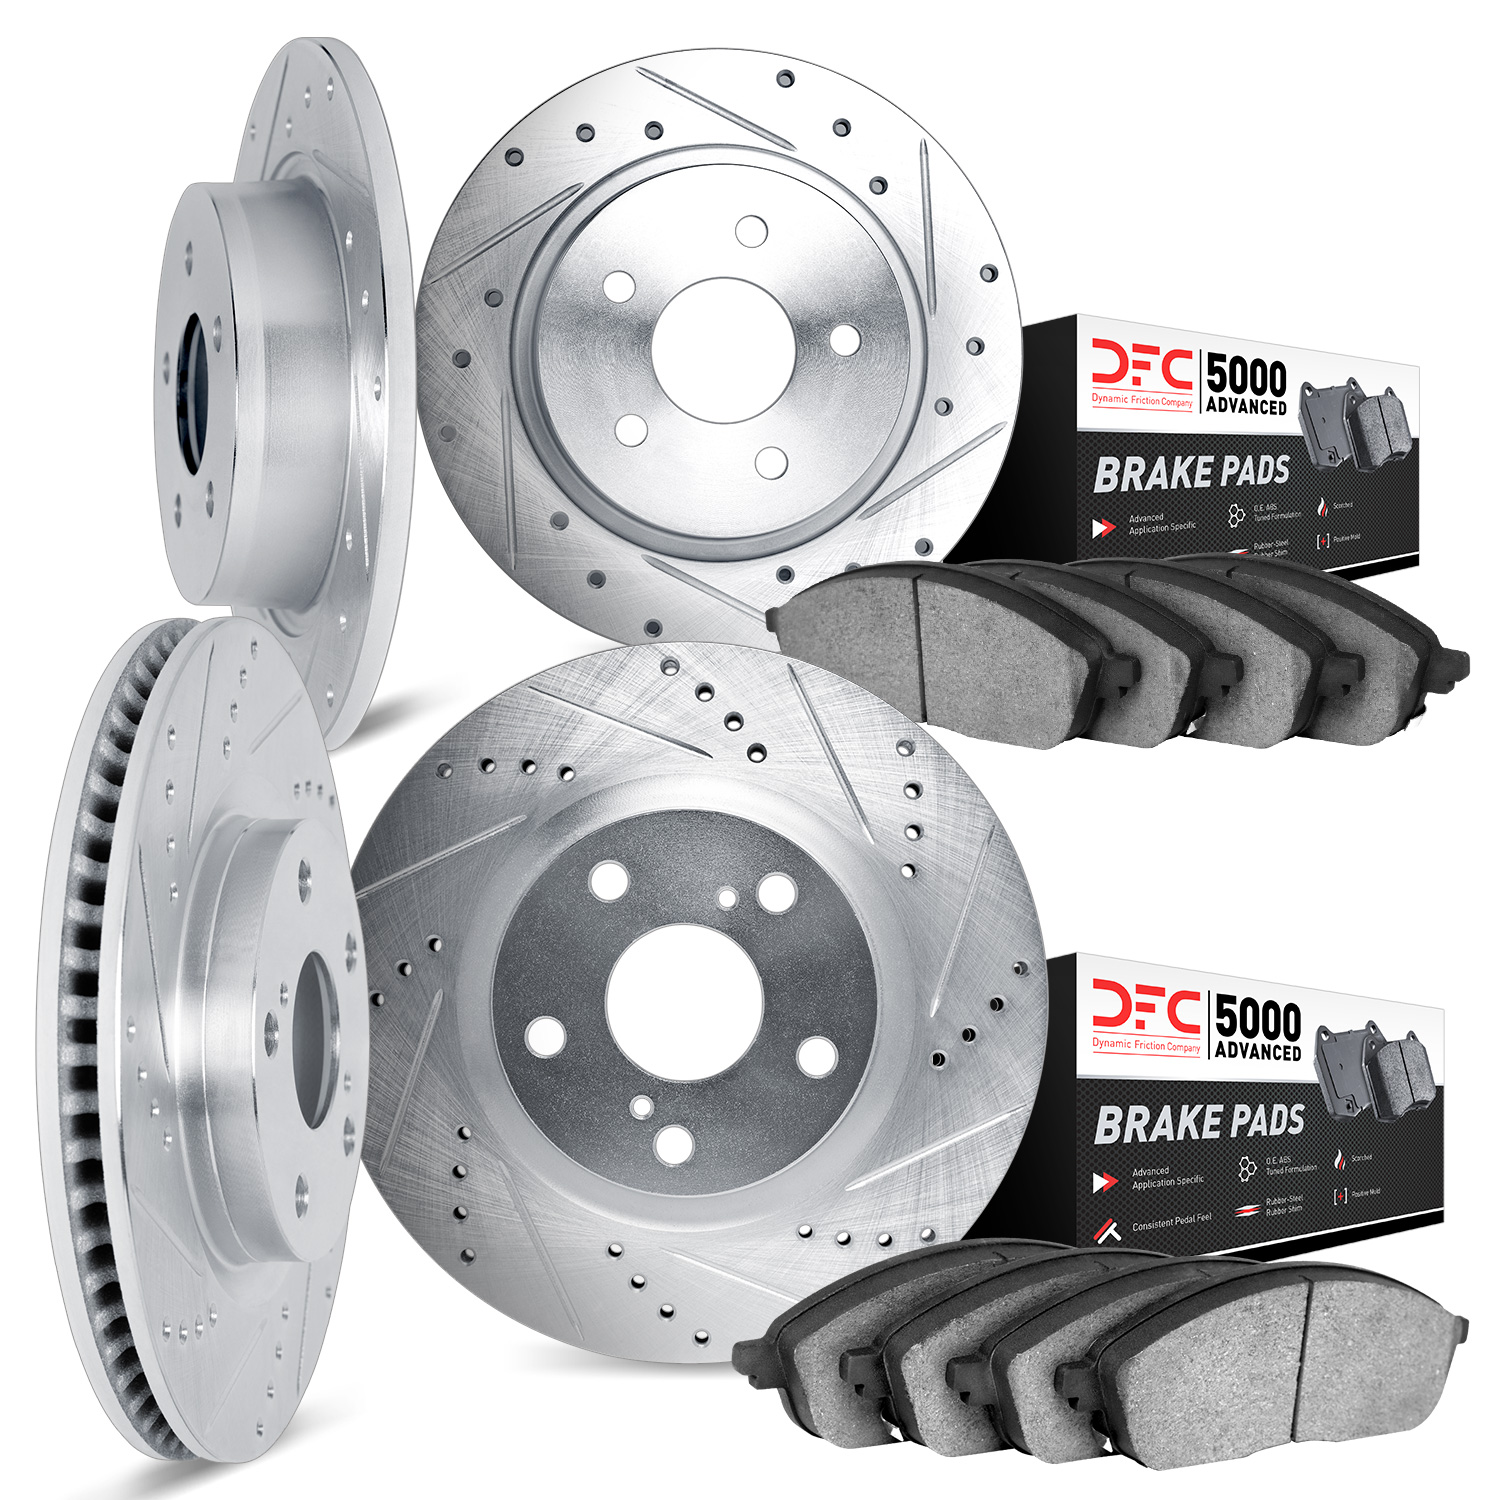 7504-76130 Drilled/Slotted Brake Rotors w/5000 Advanced Brake Pads Kit [Silver], 1992-1996 Lexus/Toyota/Scion, Position: Front a